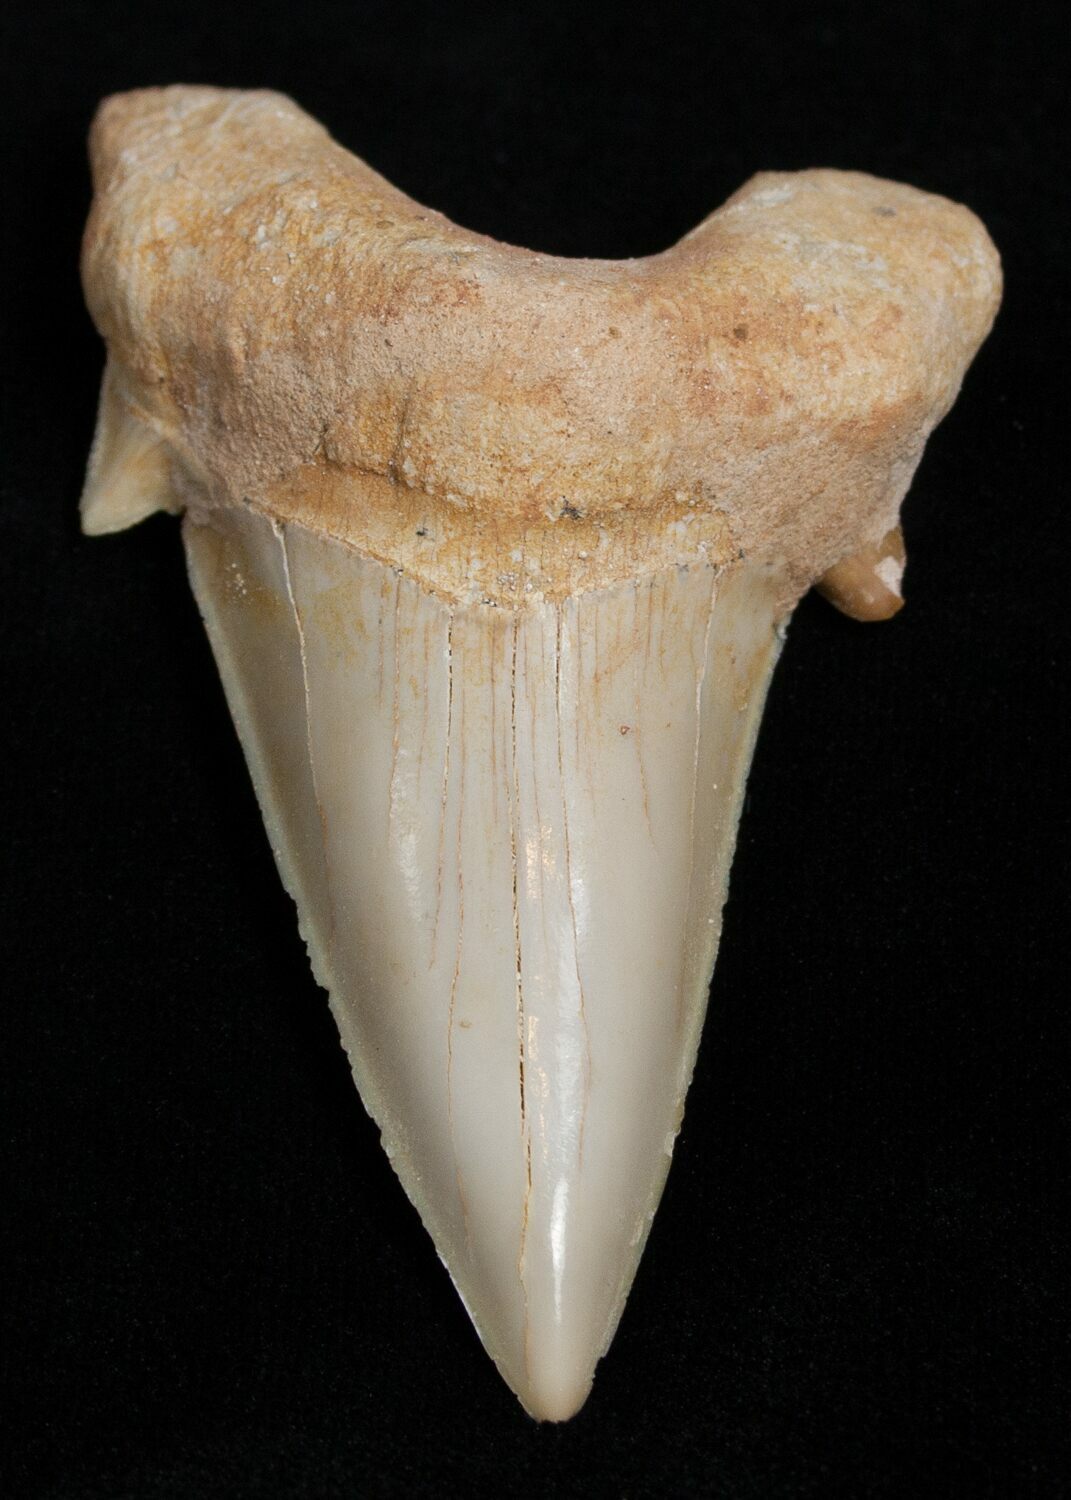 High Quality Otodus Fossil Shark Tooth For Sale (#2225) - FossilEra.com